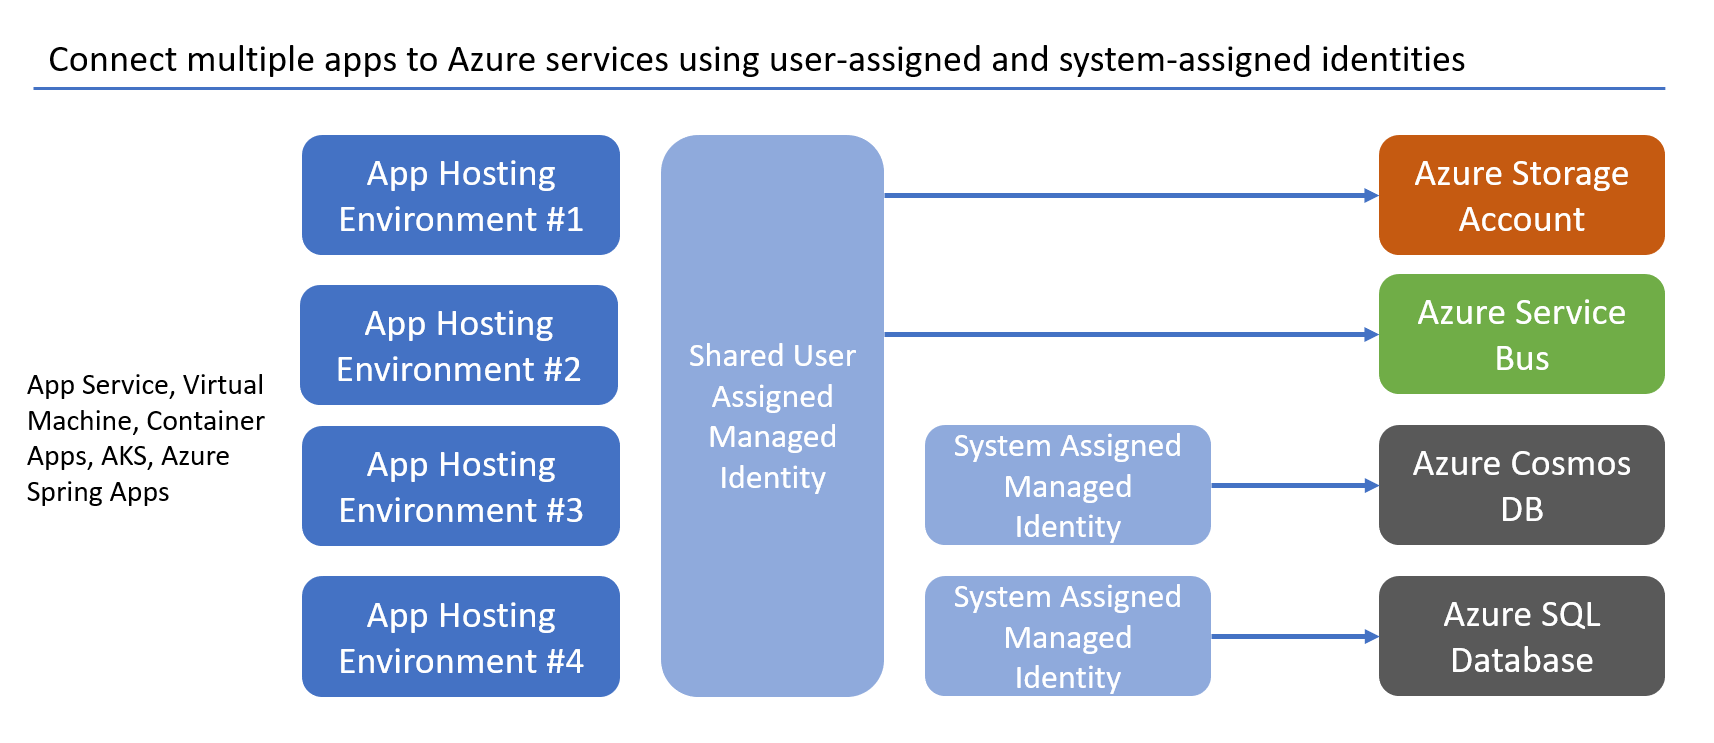 Diagram showing user-assigned and system-assigned managed identities.